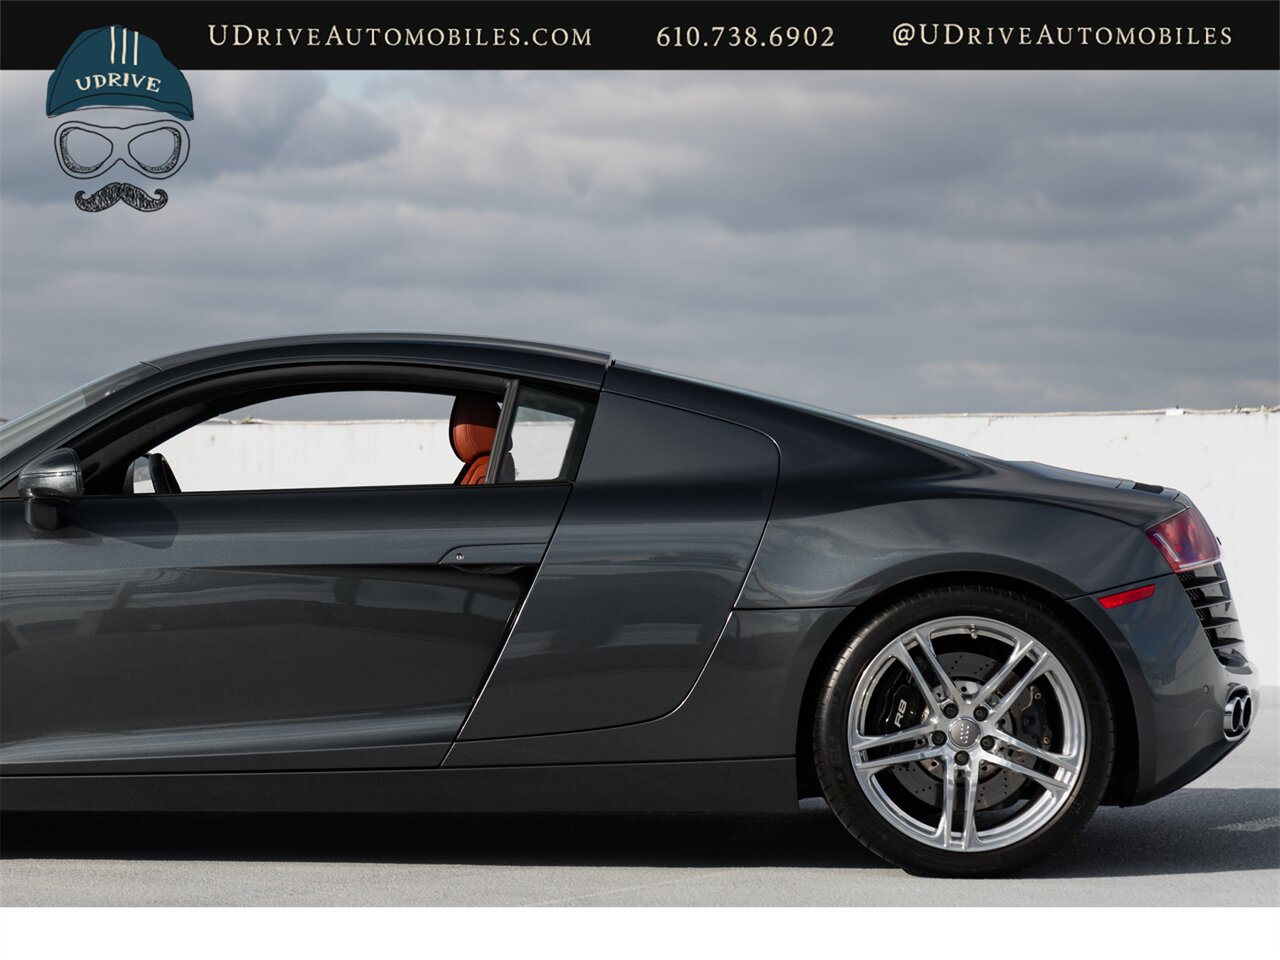 2009 Audi R8 Quattro  4.2 V8 6 Speed Manual 15k Miles - Photo 27 - West Chester, PA 19382